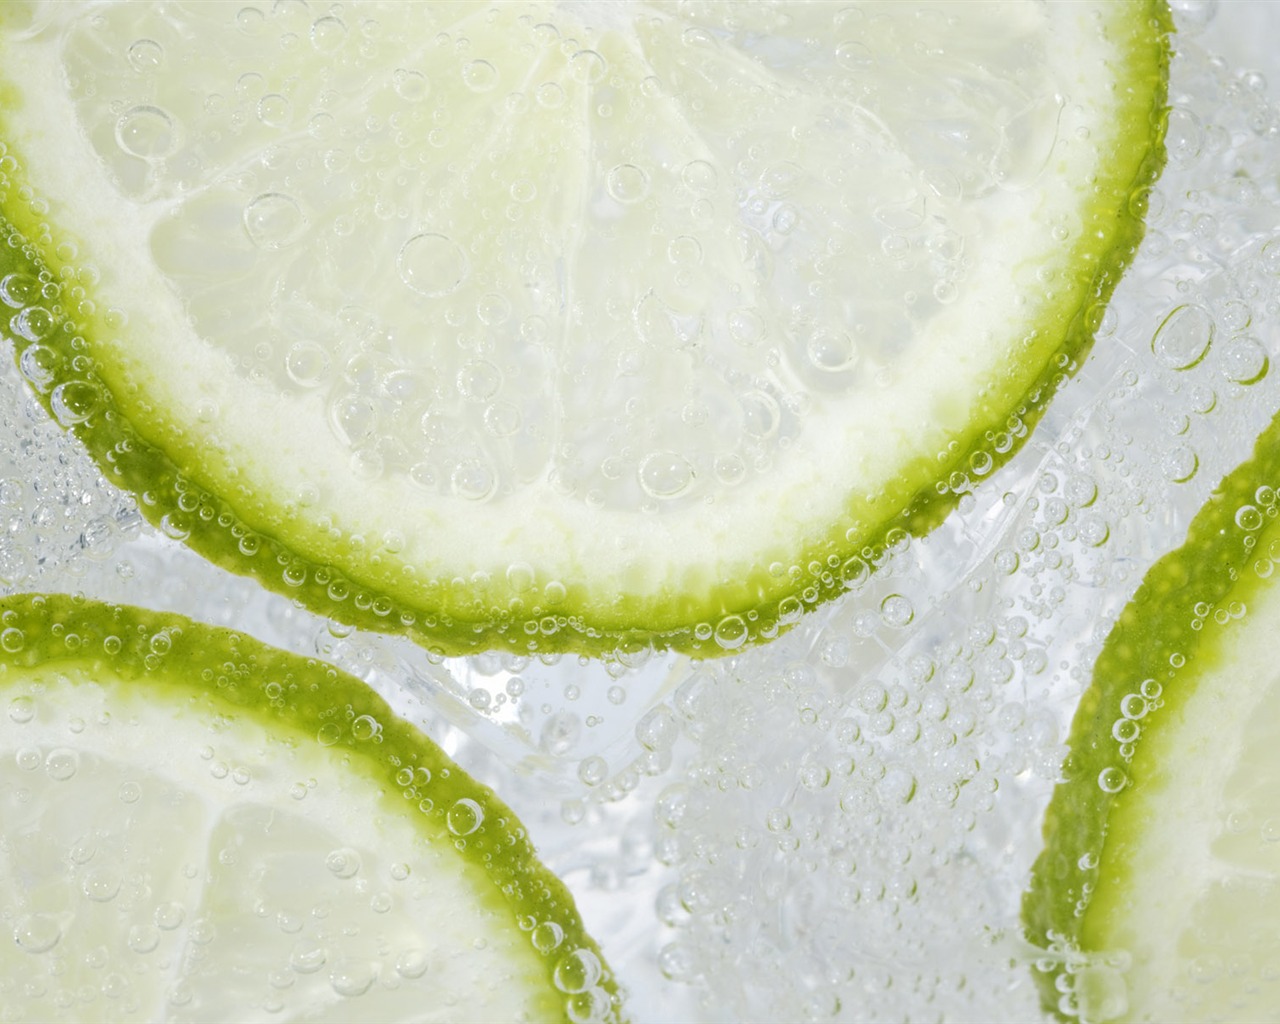 Ice-cold drinks Wallpaper #37 - 1280x1024